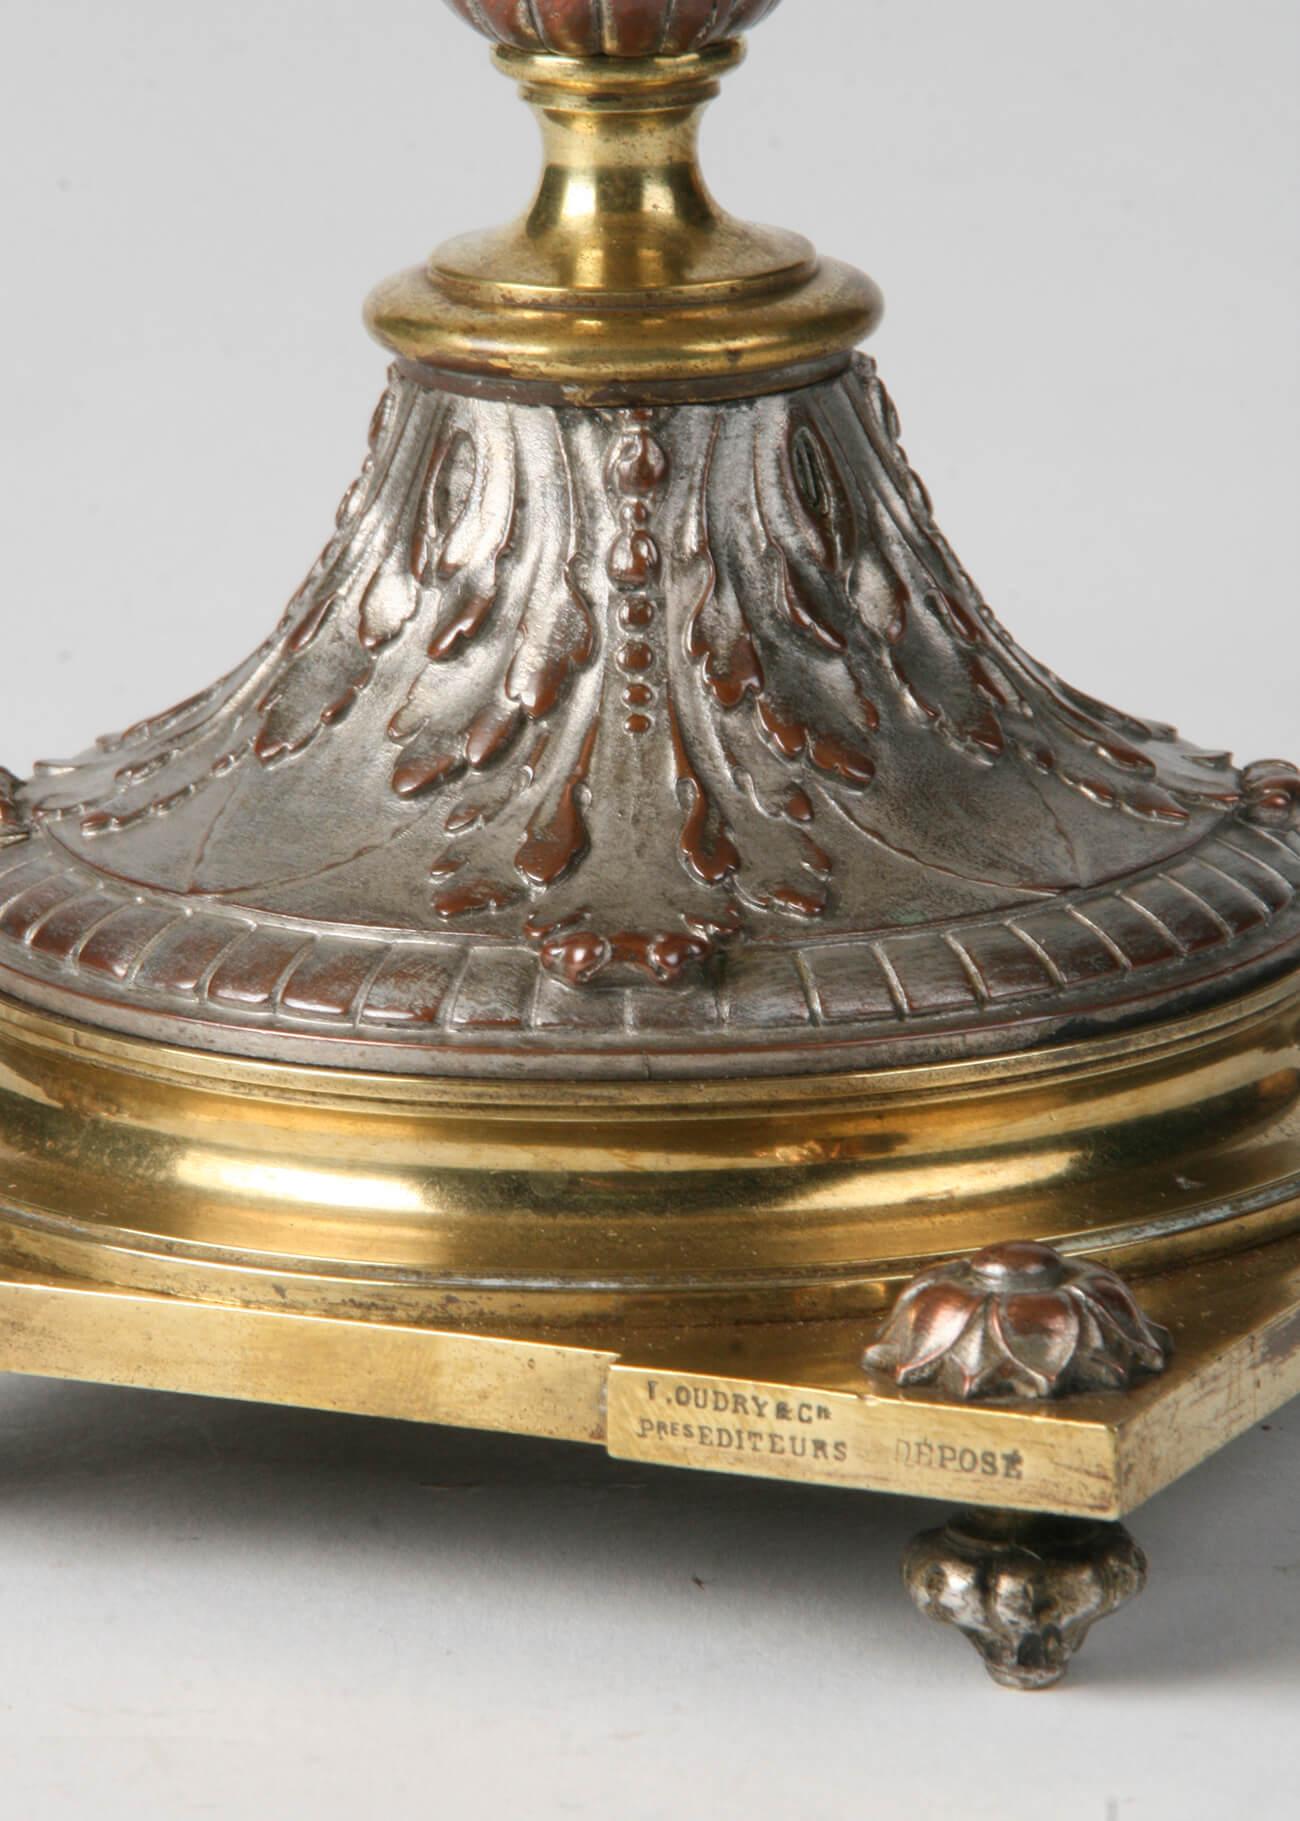 19th Century Bronze and Copper Tazza Dish, Casted by Leopold Oudry, Paris 8